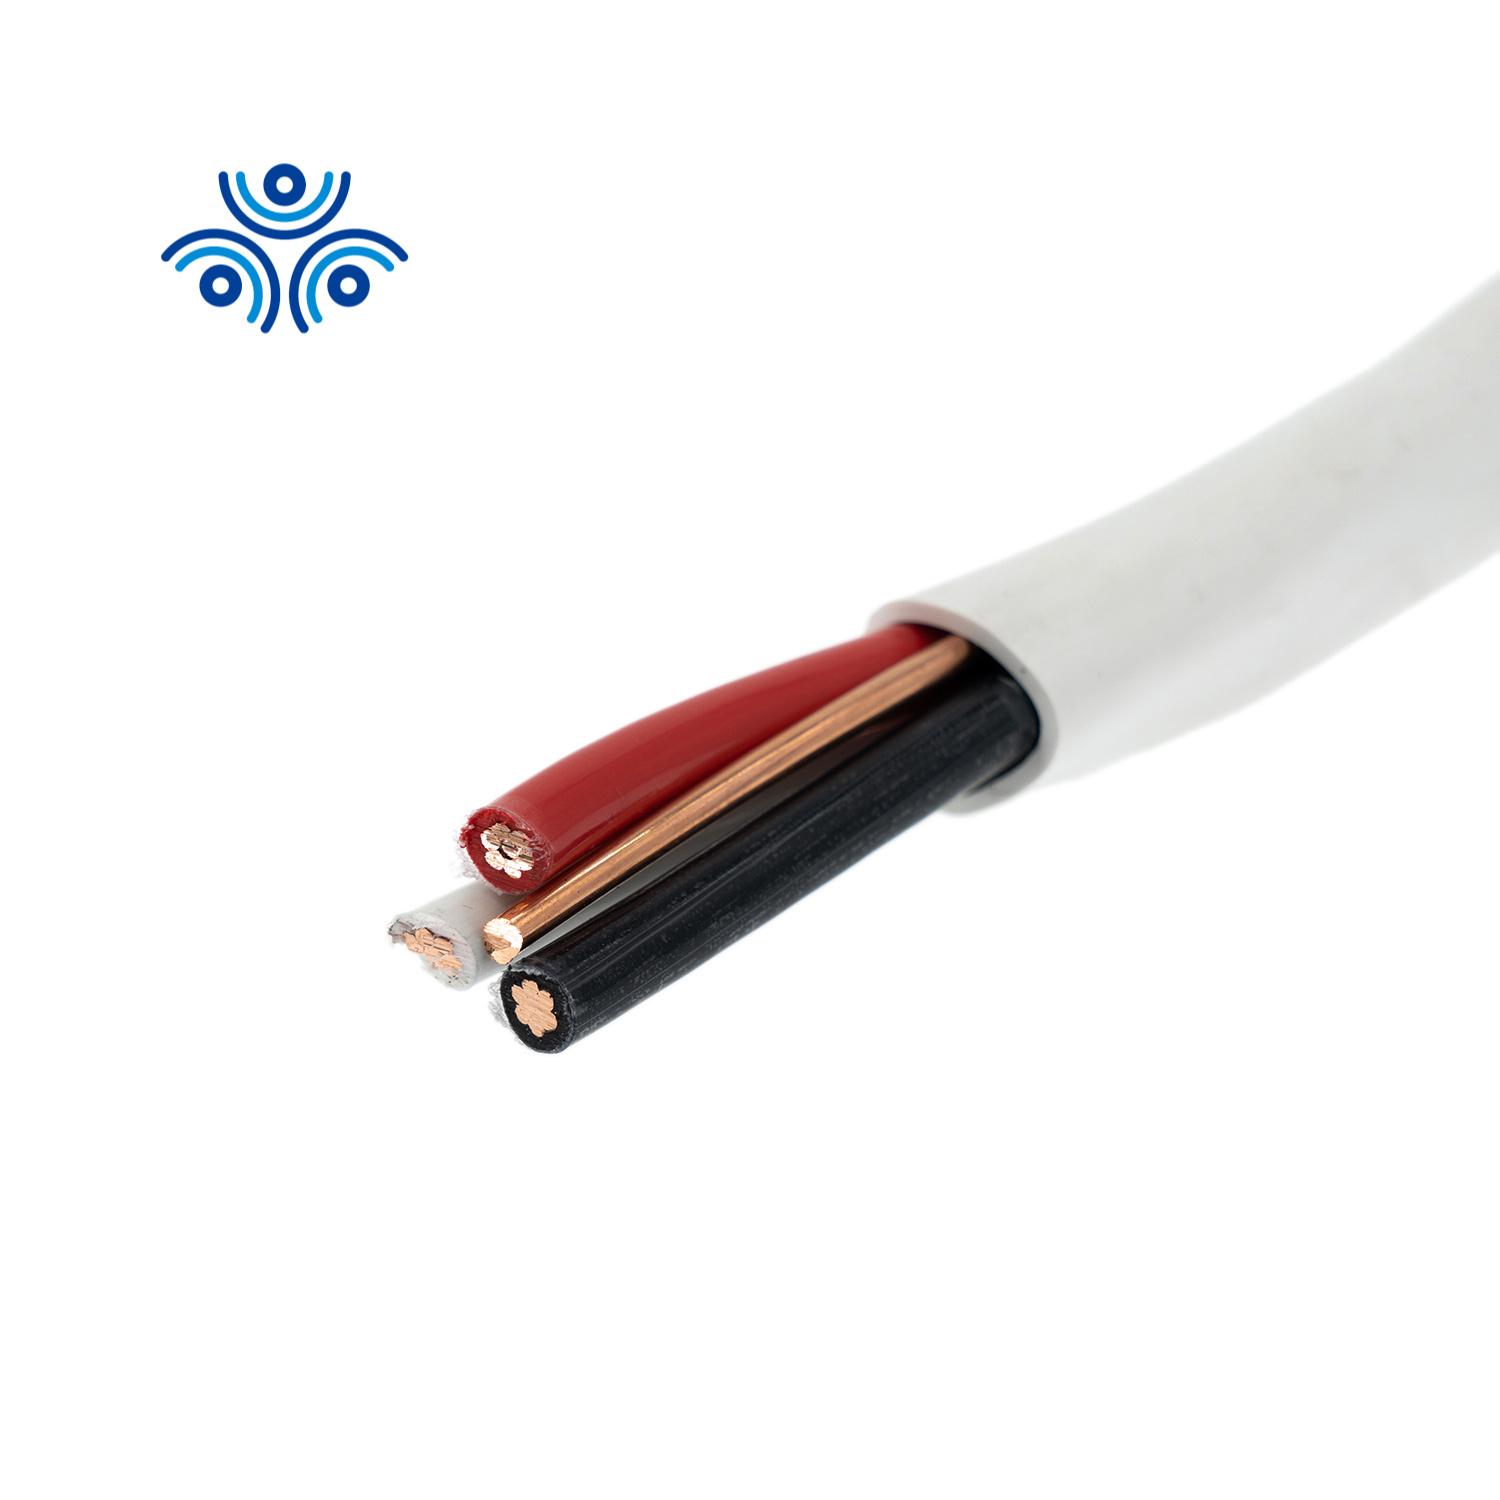 Nonmetallic-Sheathed Cable Certified for Canada Type Nmd90 Wire